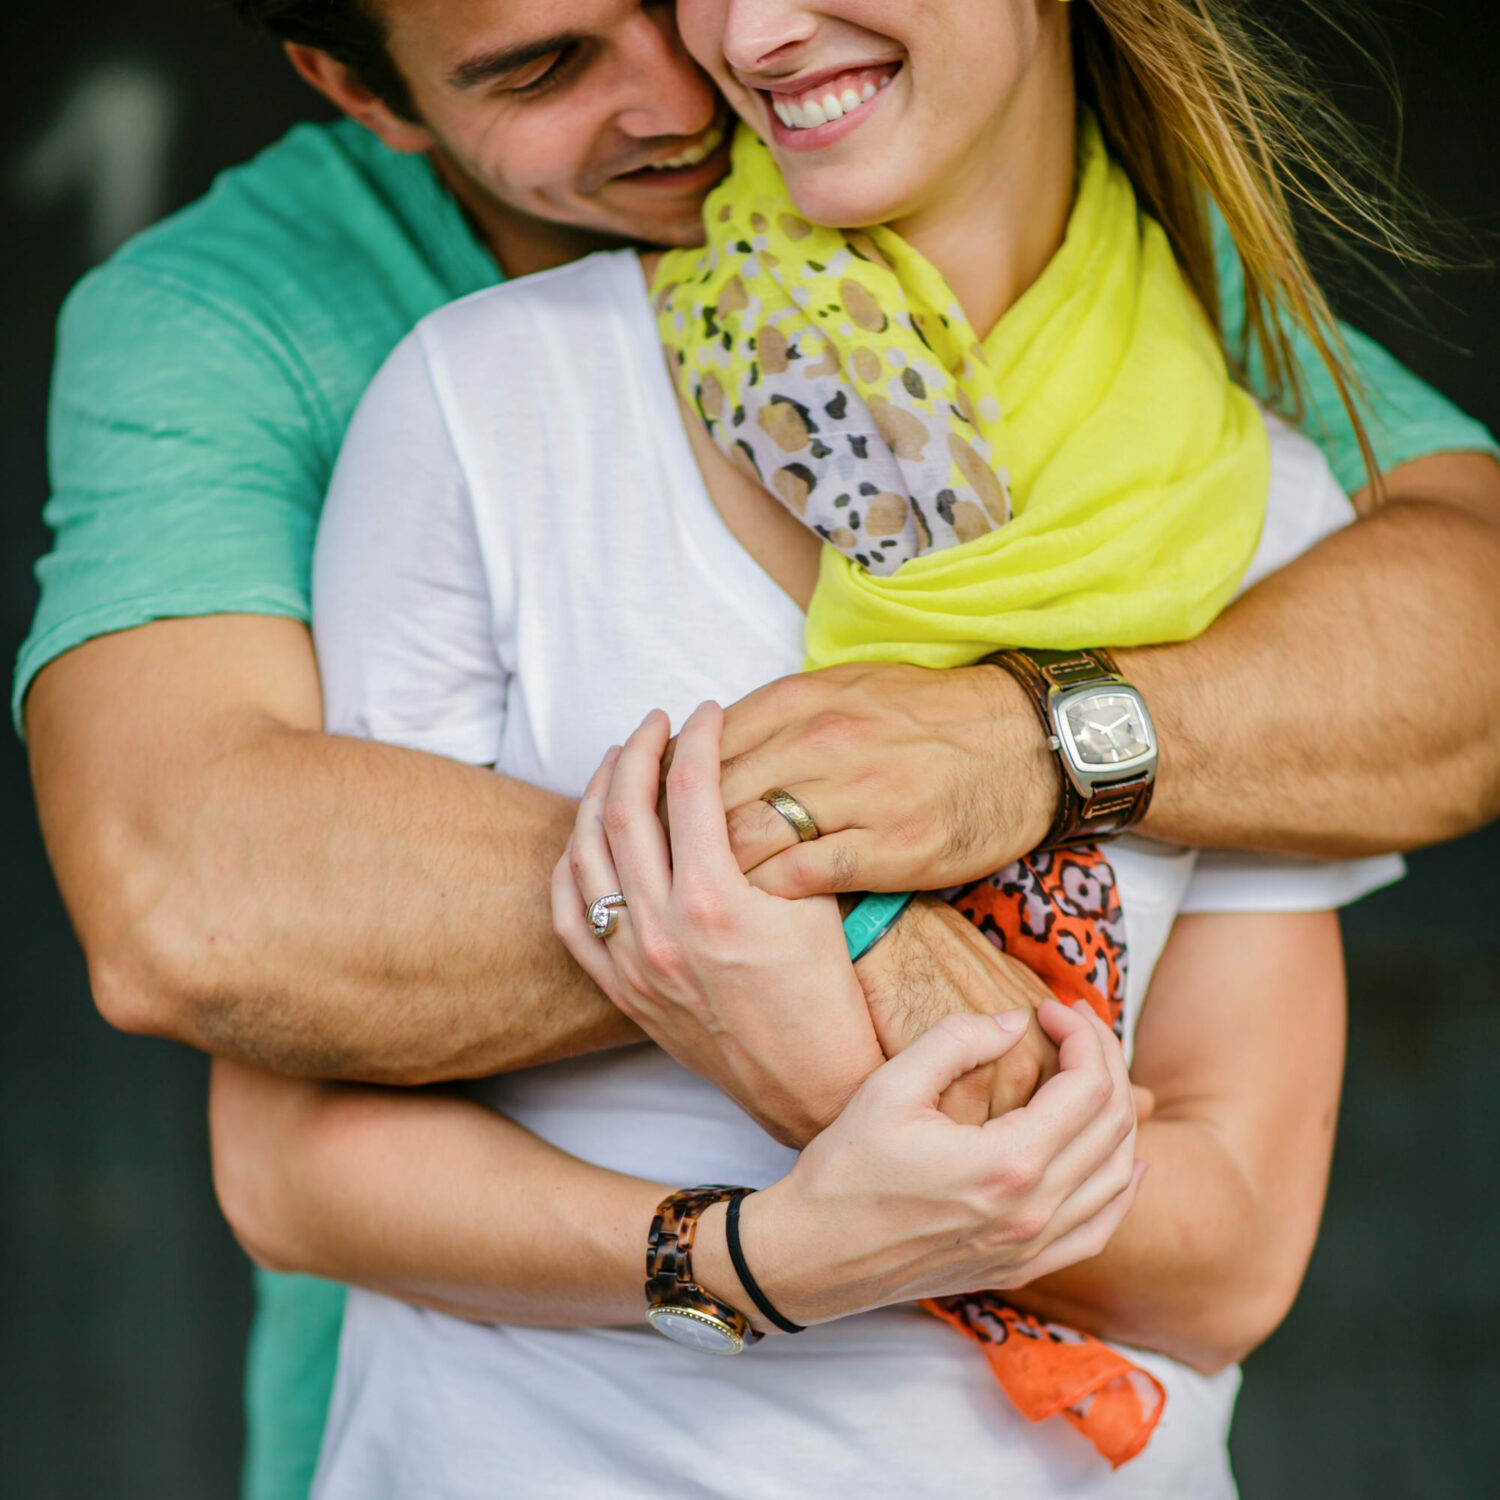 Colorful scarf idea for engagement photos.